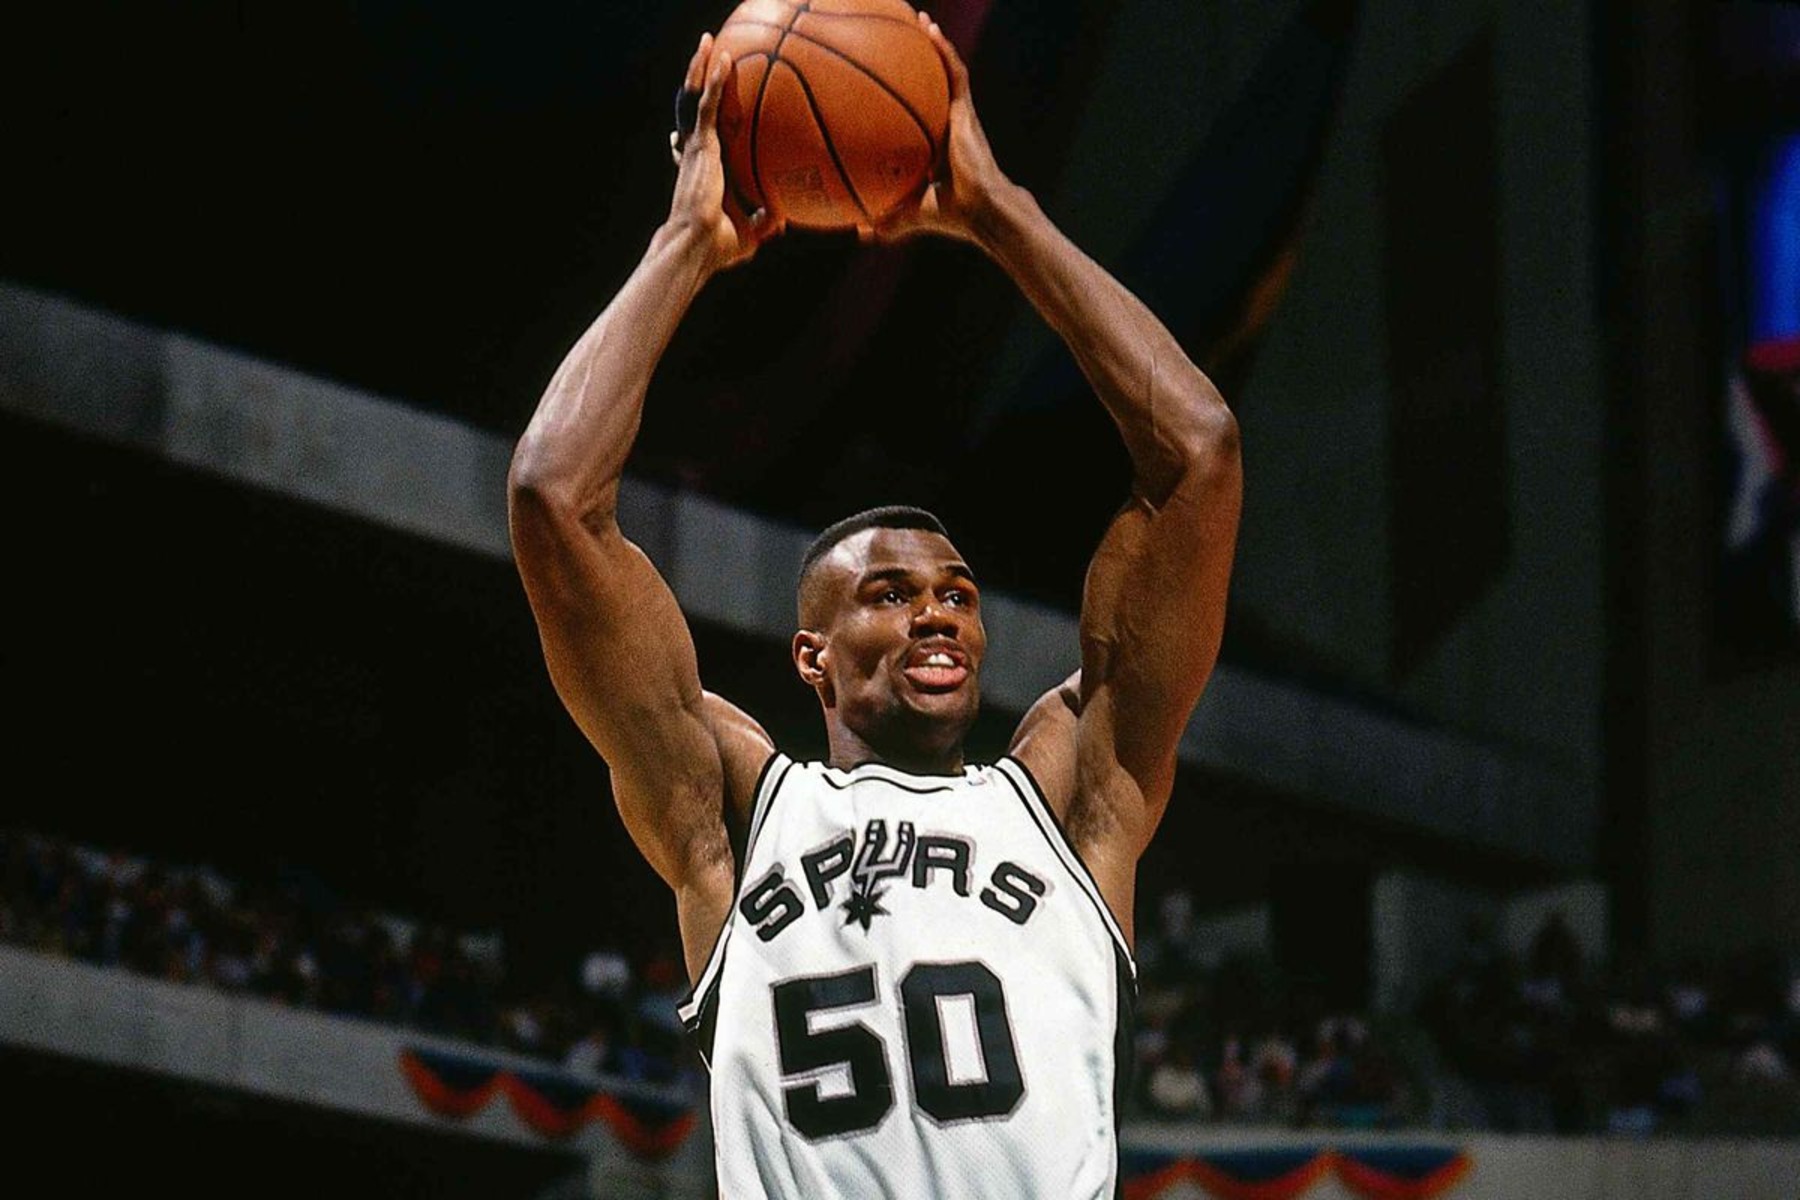 21-extraordinary-facts-about-david-robinson